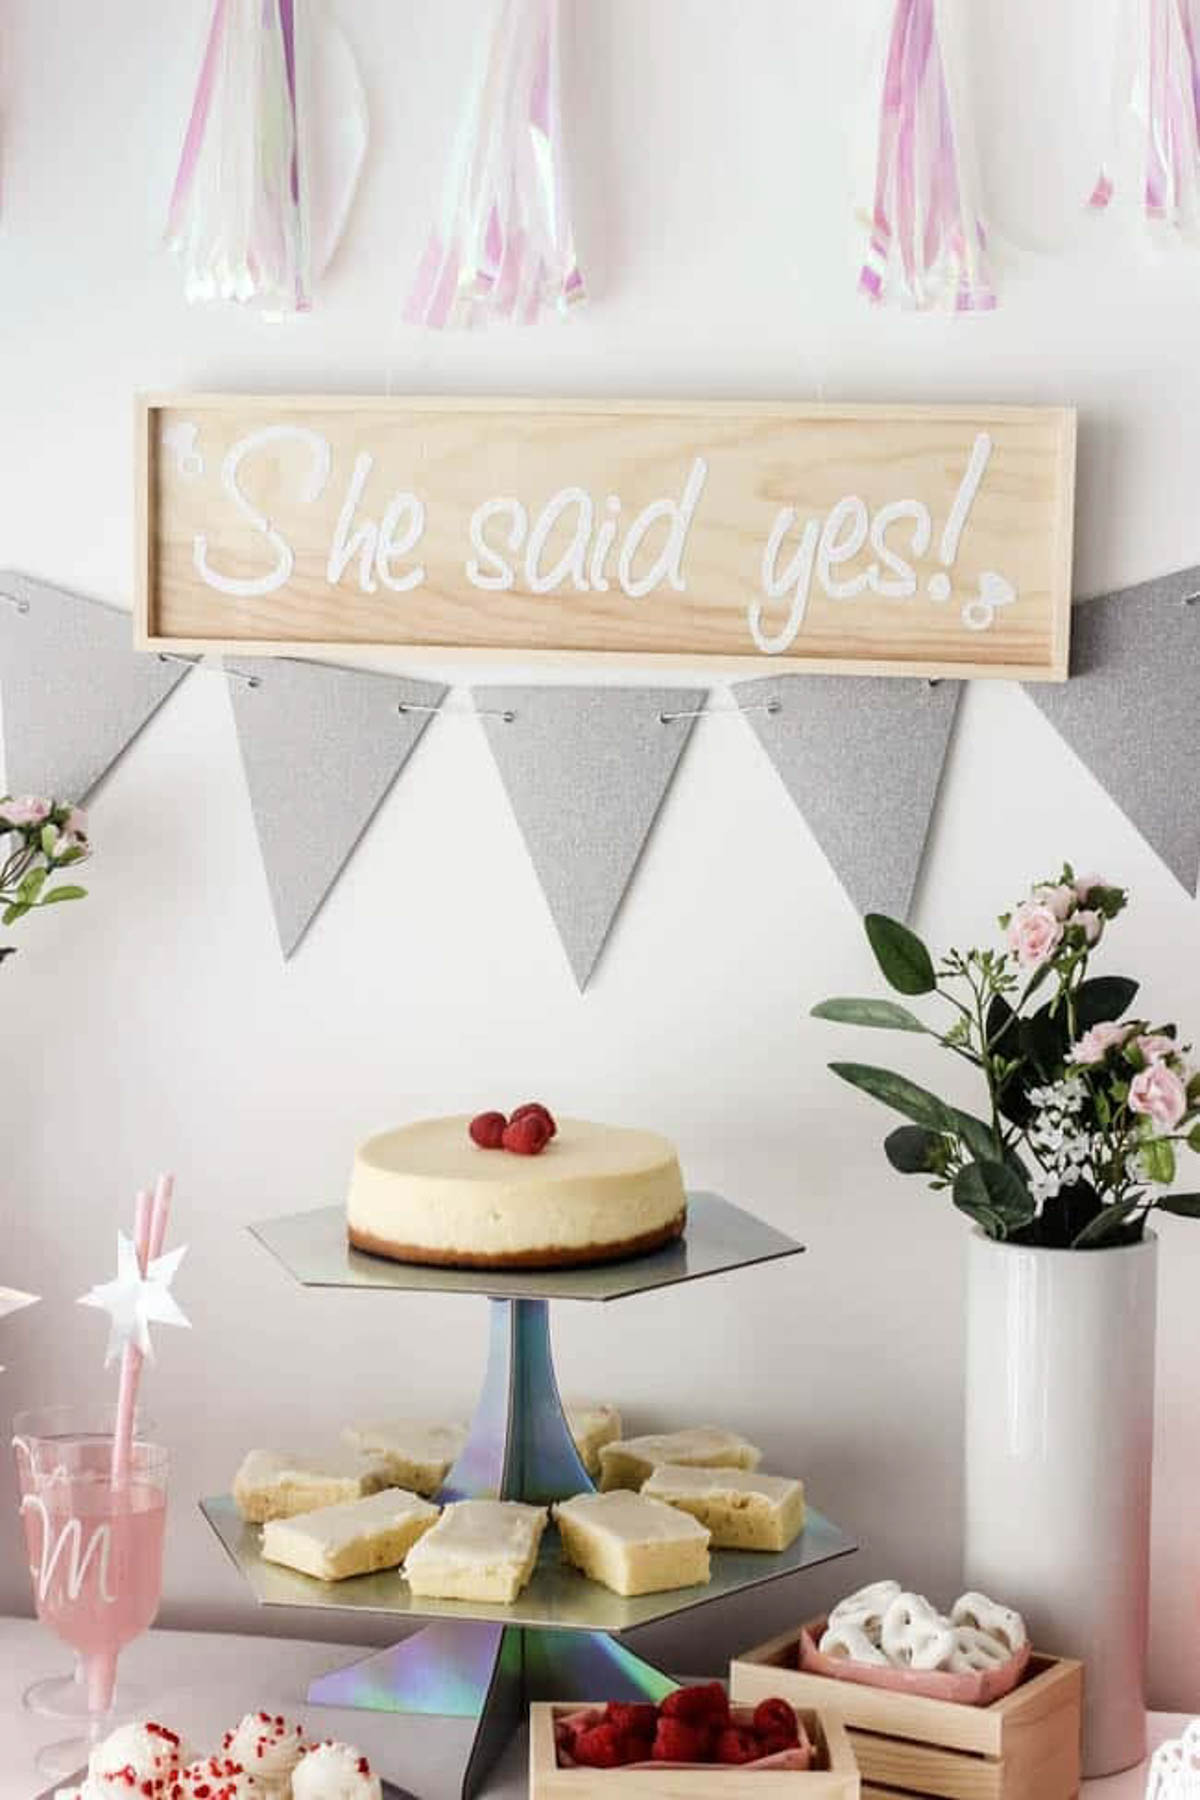 Dessert table decorated for a bridal shower